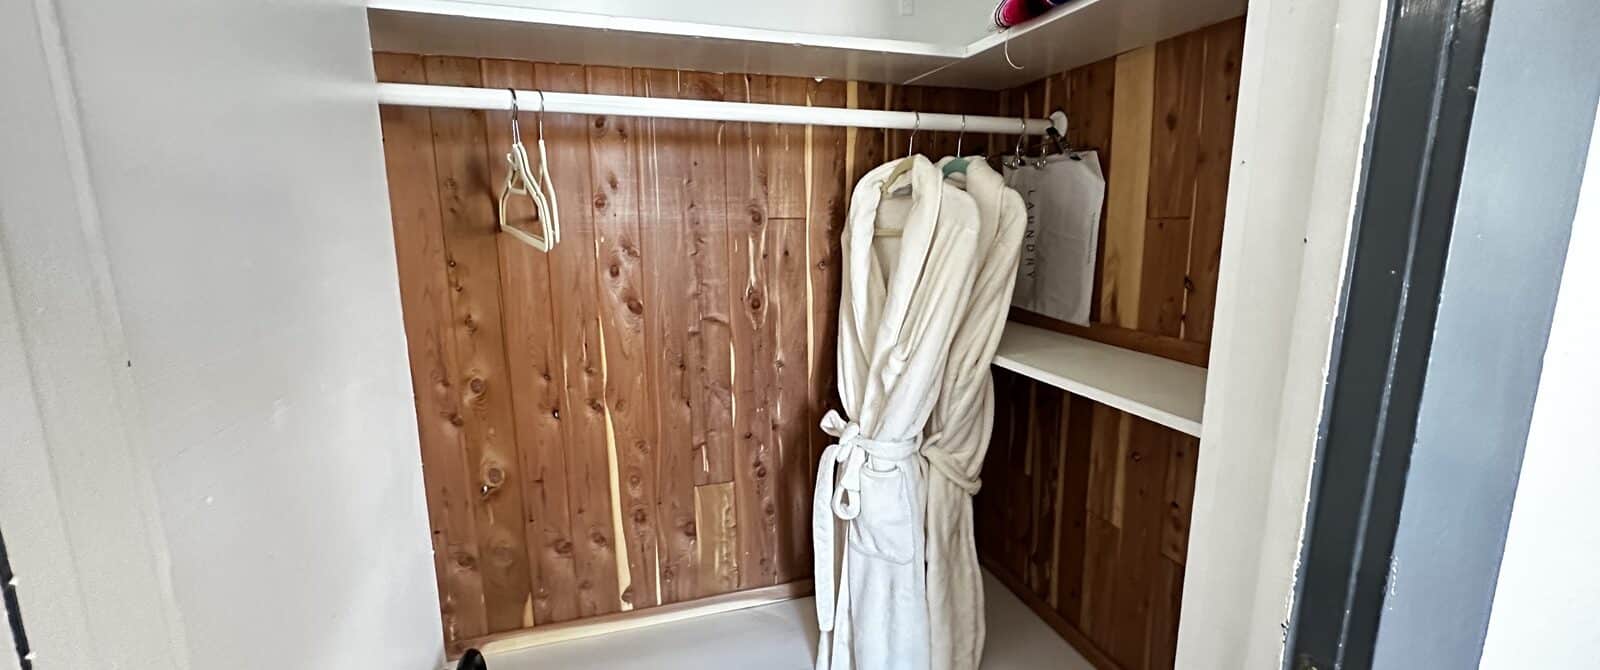 Cedar-lined closet with two robes, shelves, blanket and luggage rack